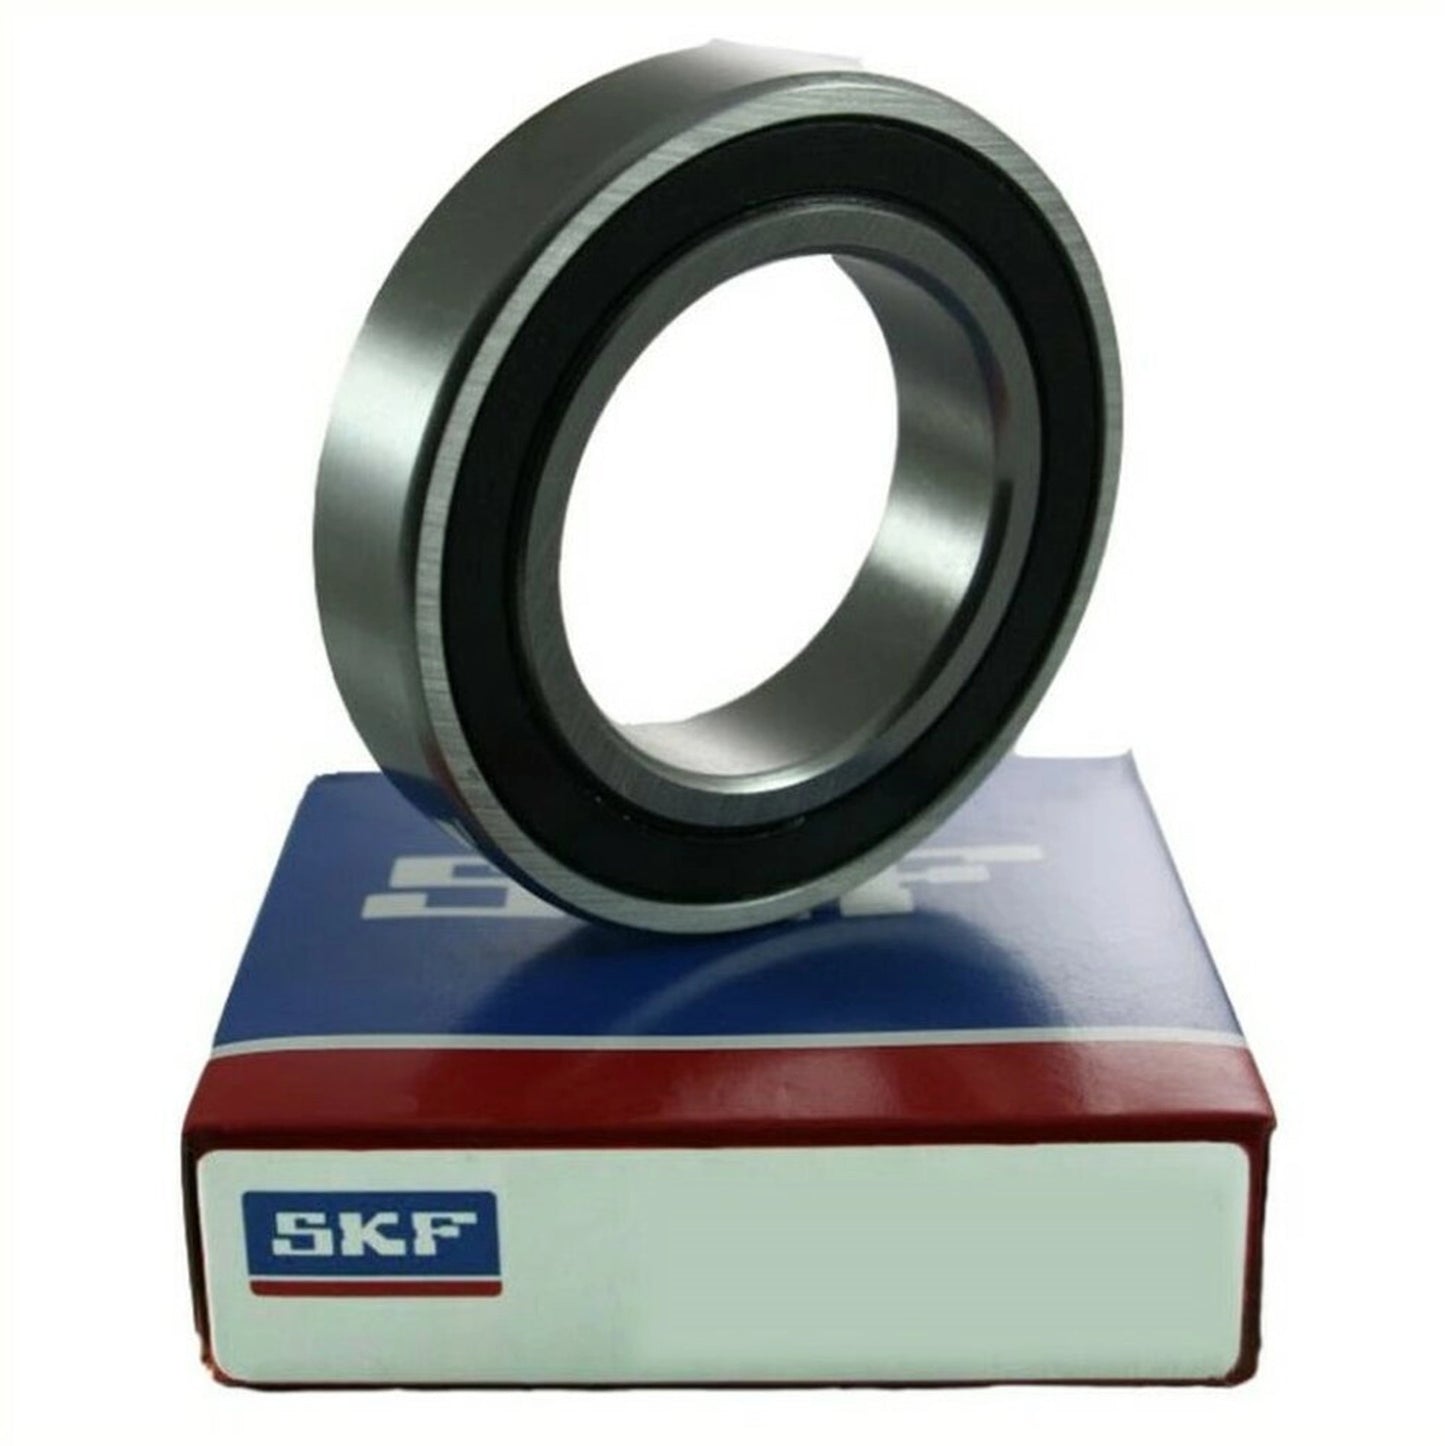 Lager 6207-2RS1NR / C3 35x72x17 SKF